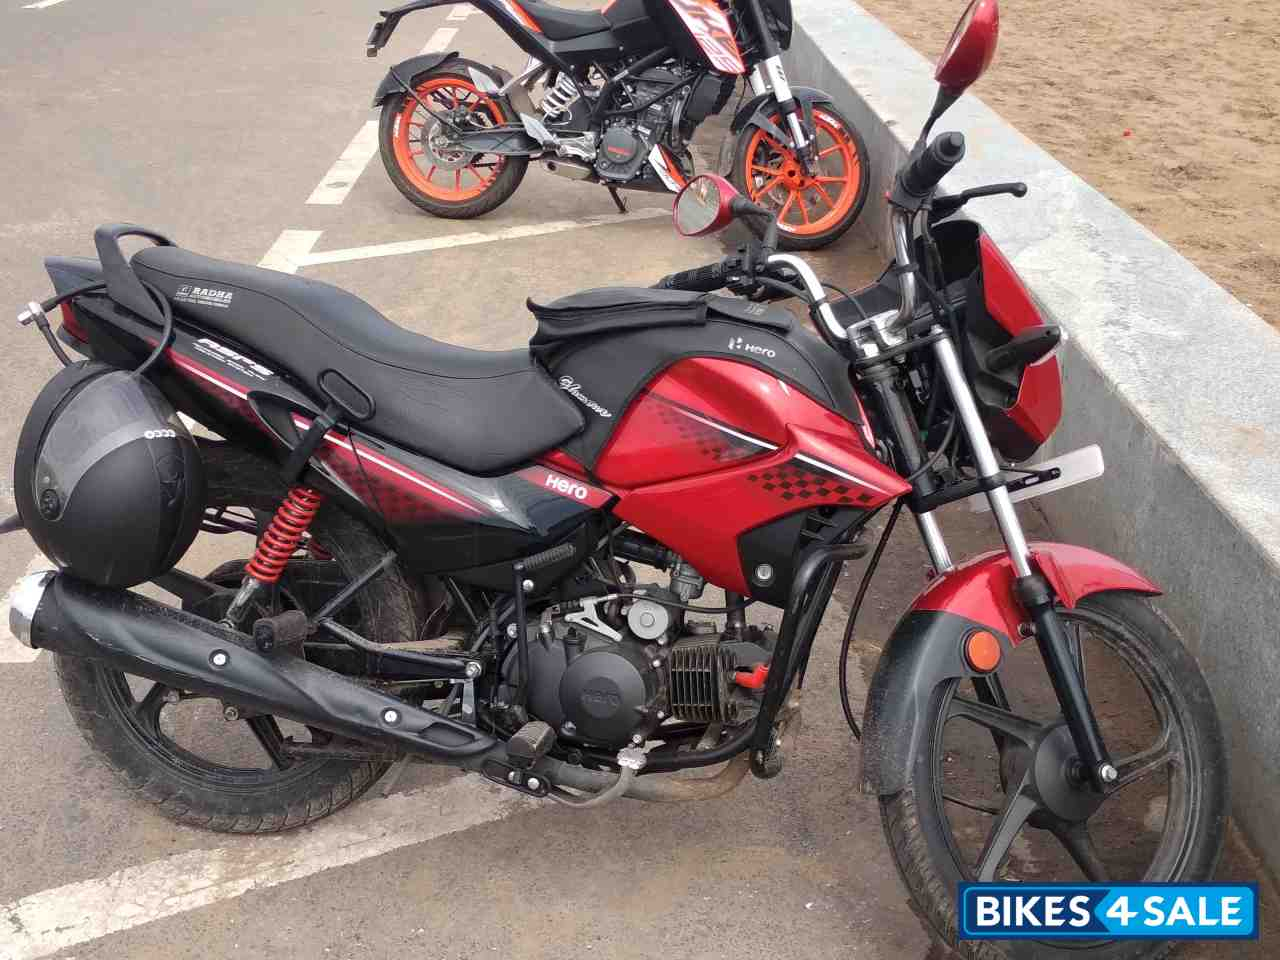 Used 2018 Model Hero Glamour 125 For Sale In Chennai. Id intérieur Hero Glamour Colours 